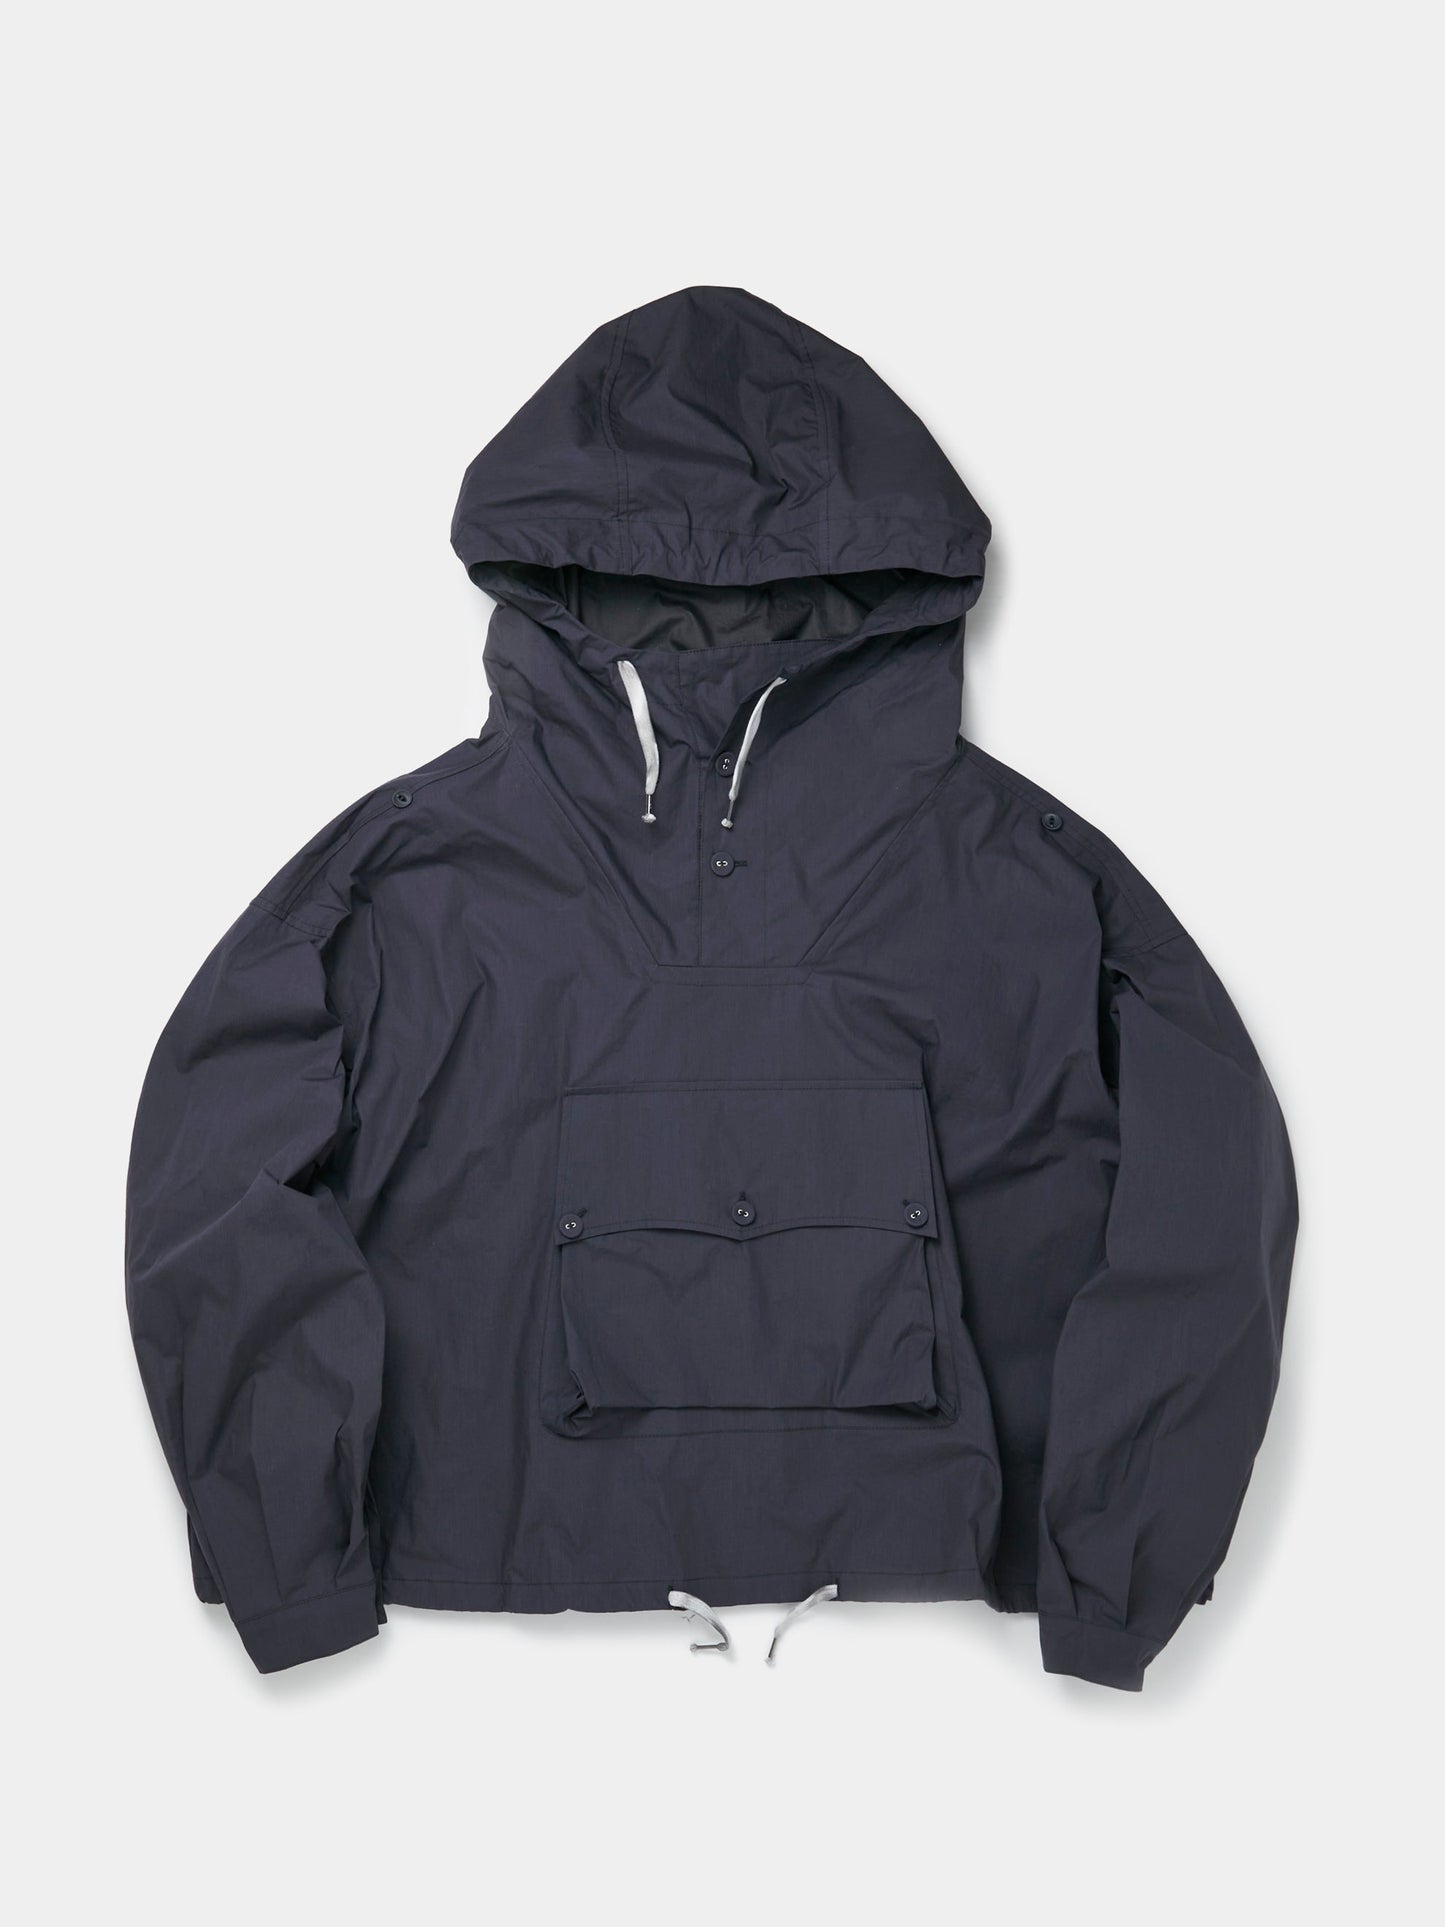 Hooded Pullover Sports Jacket (Washed Black)